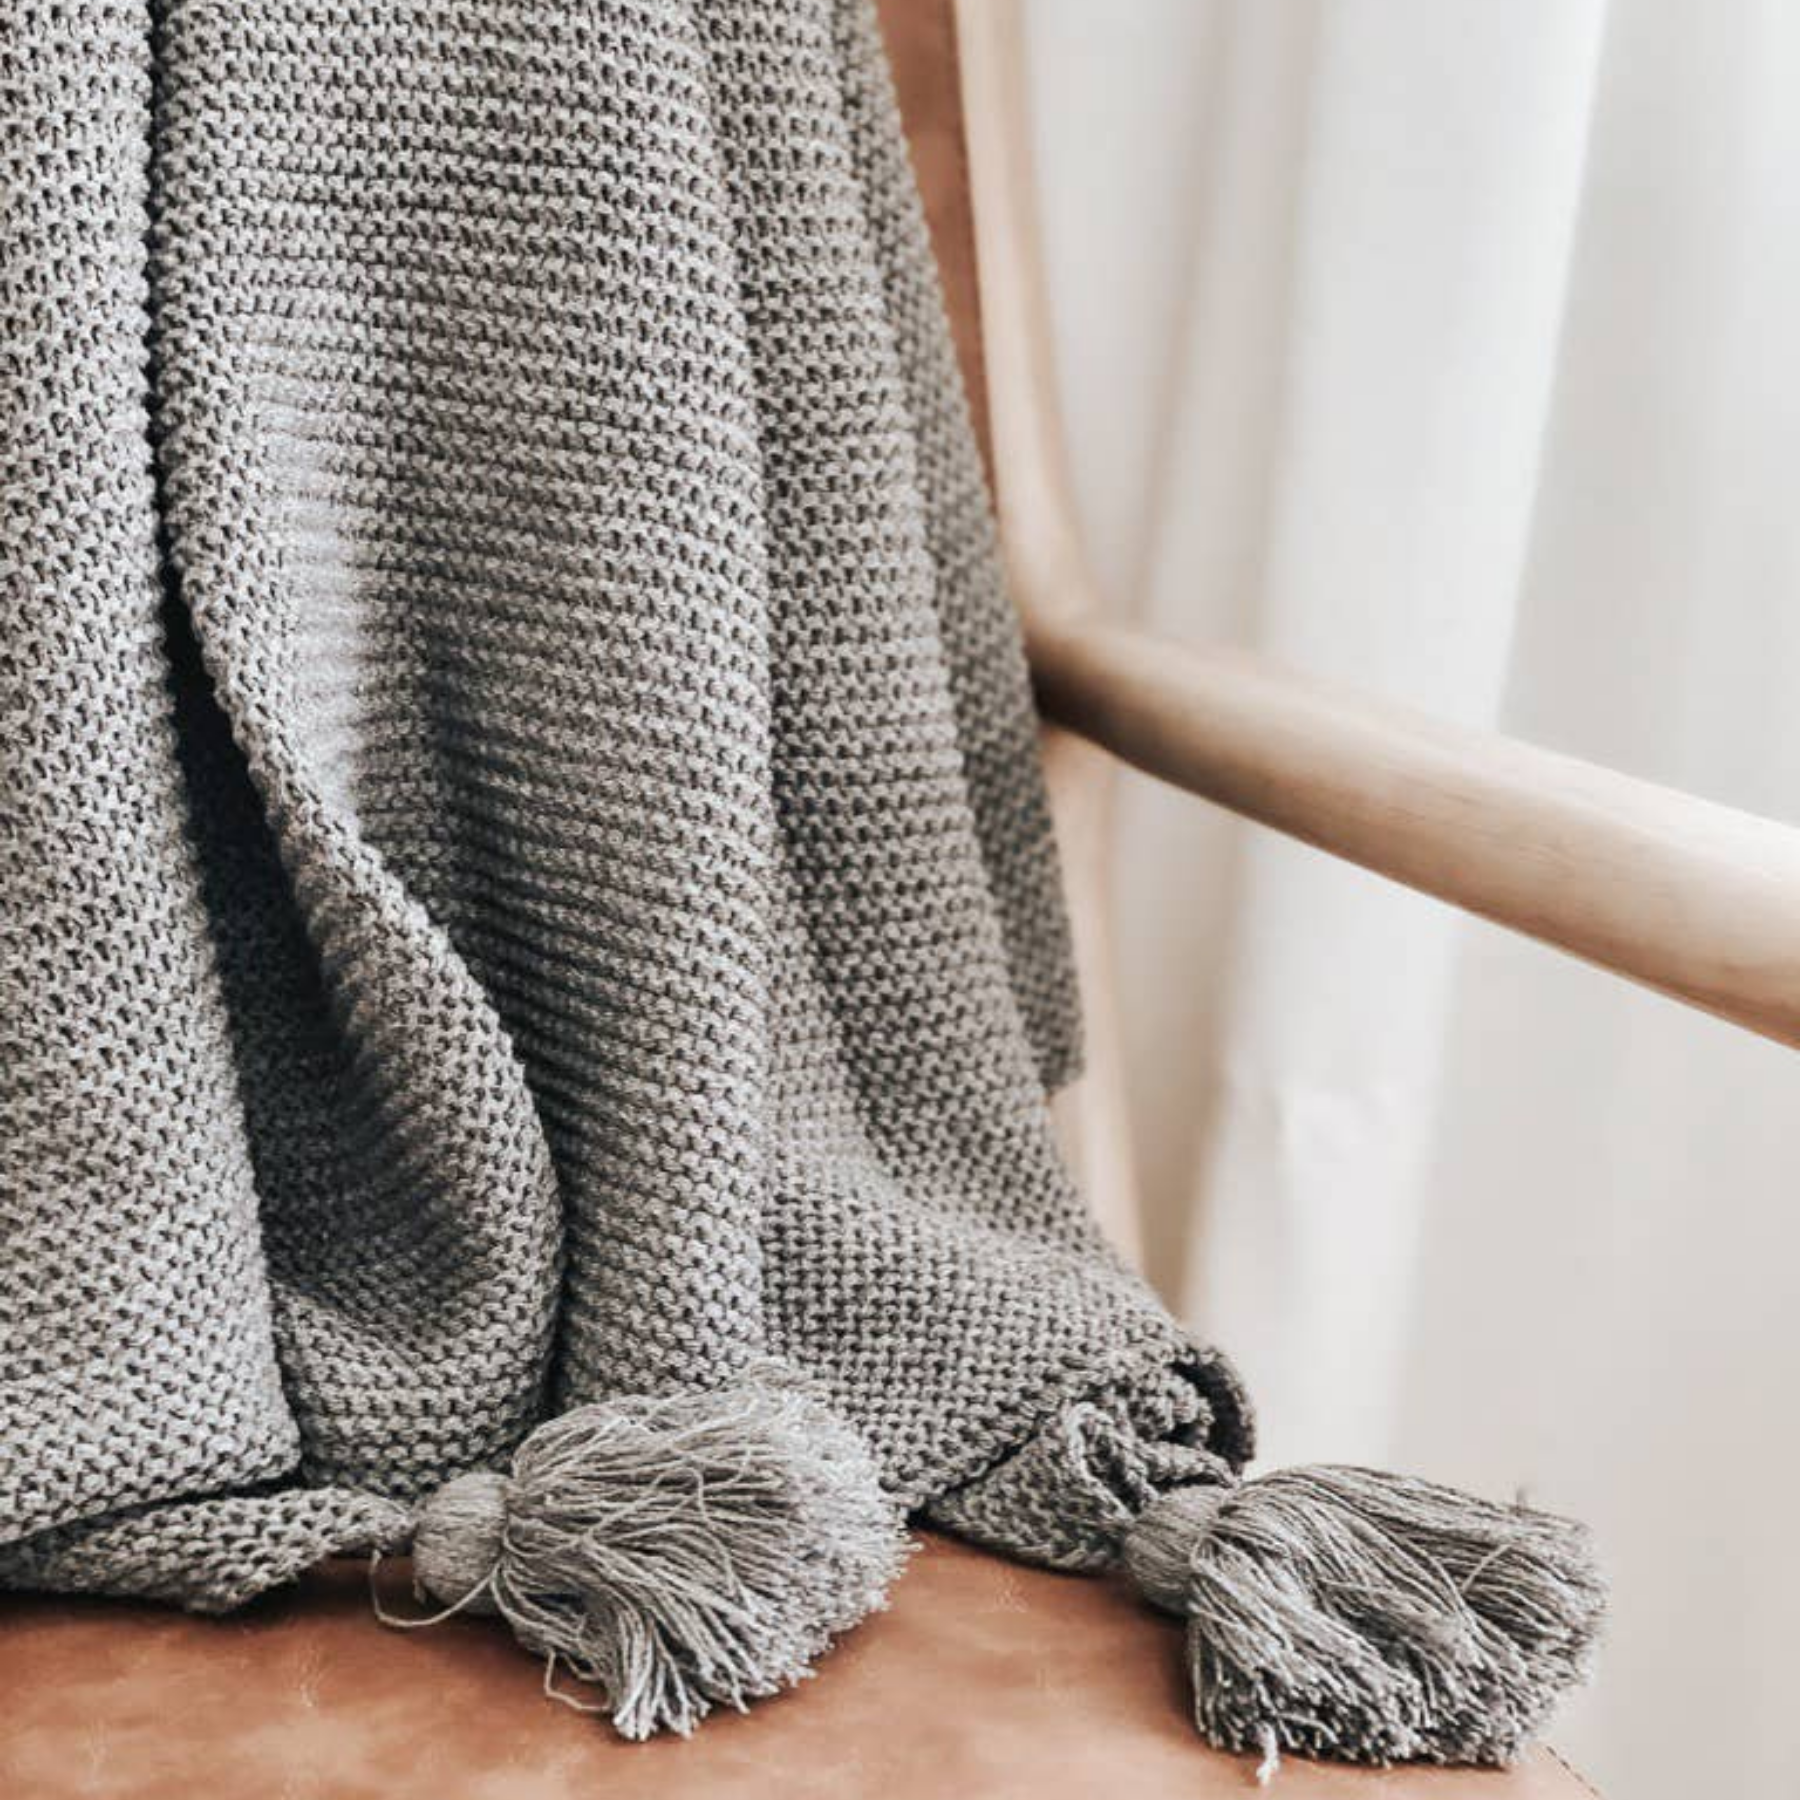 Knit Throw Blanket with Tassels - Natural